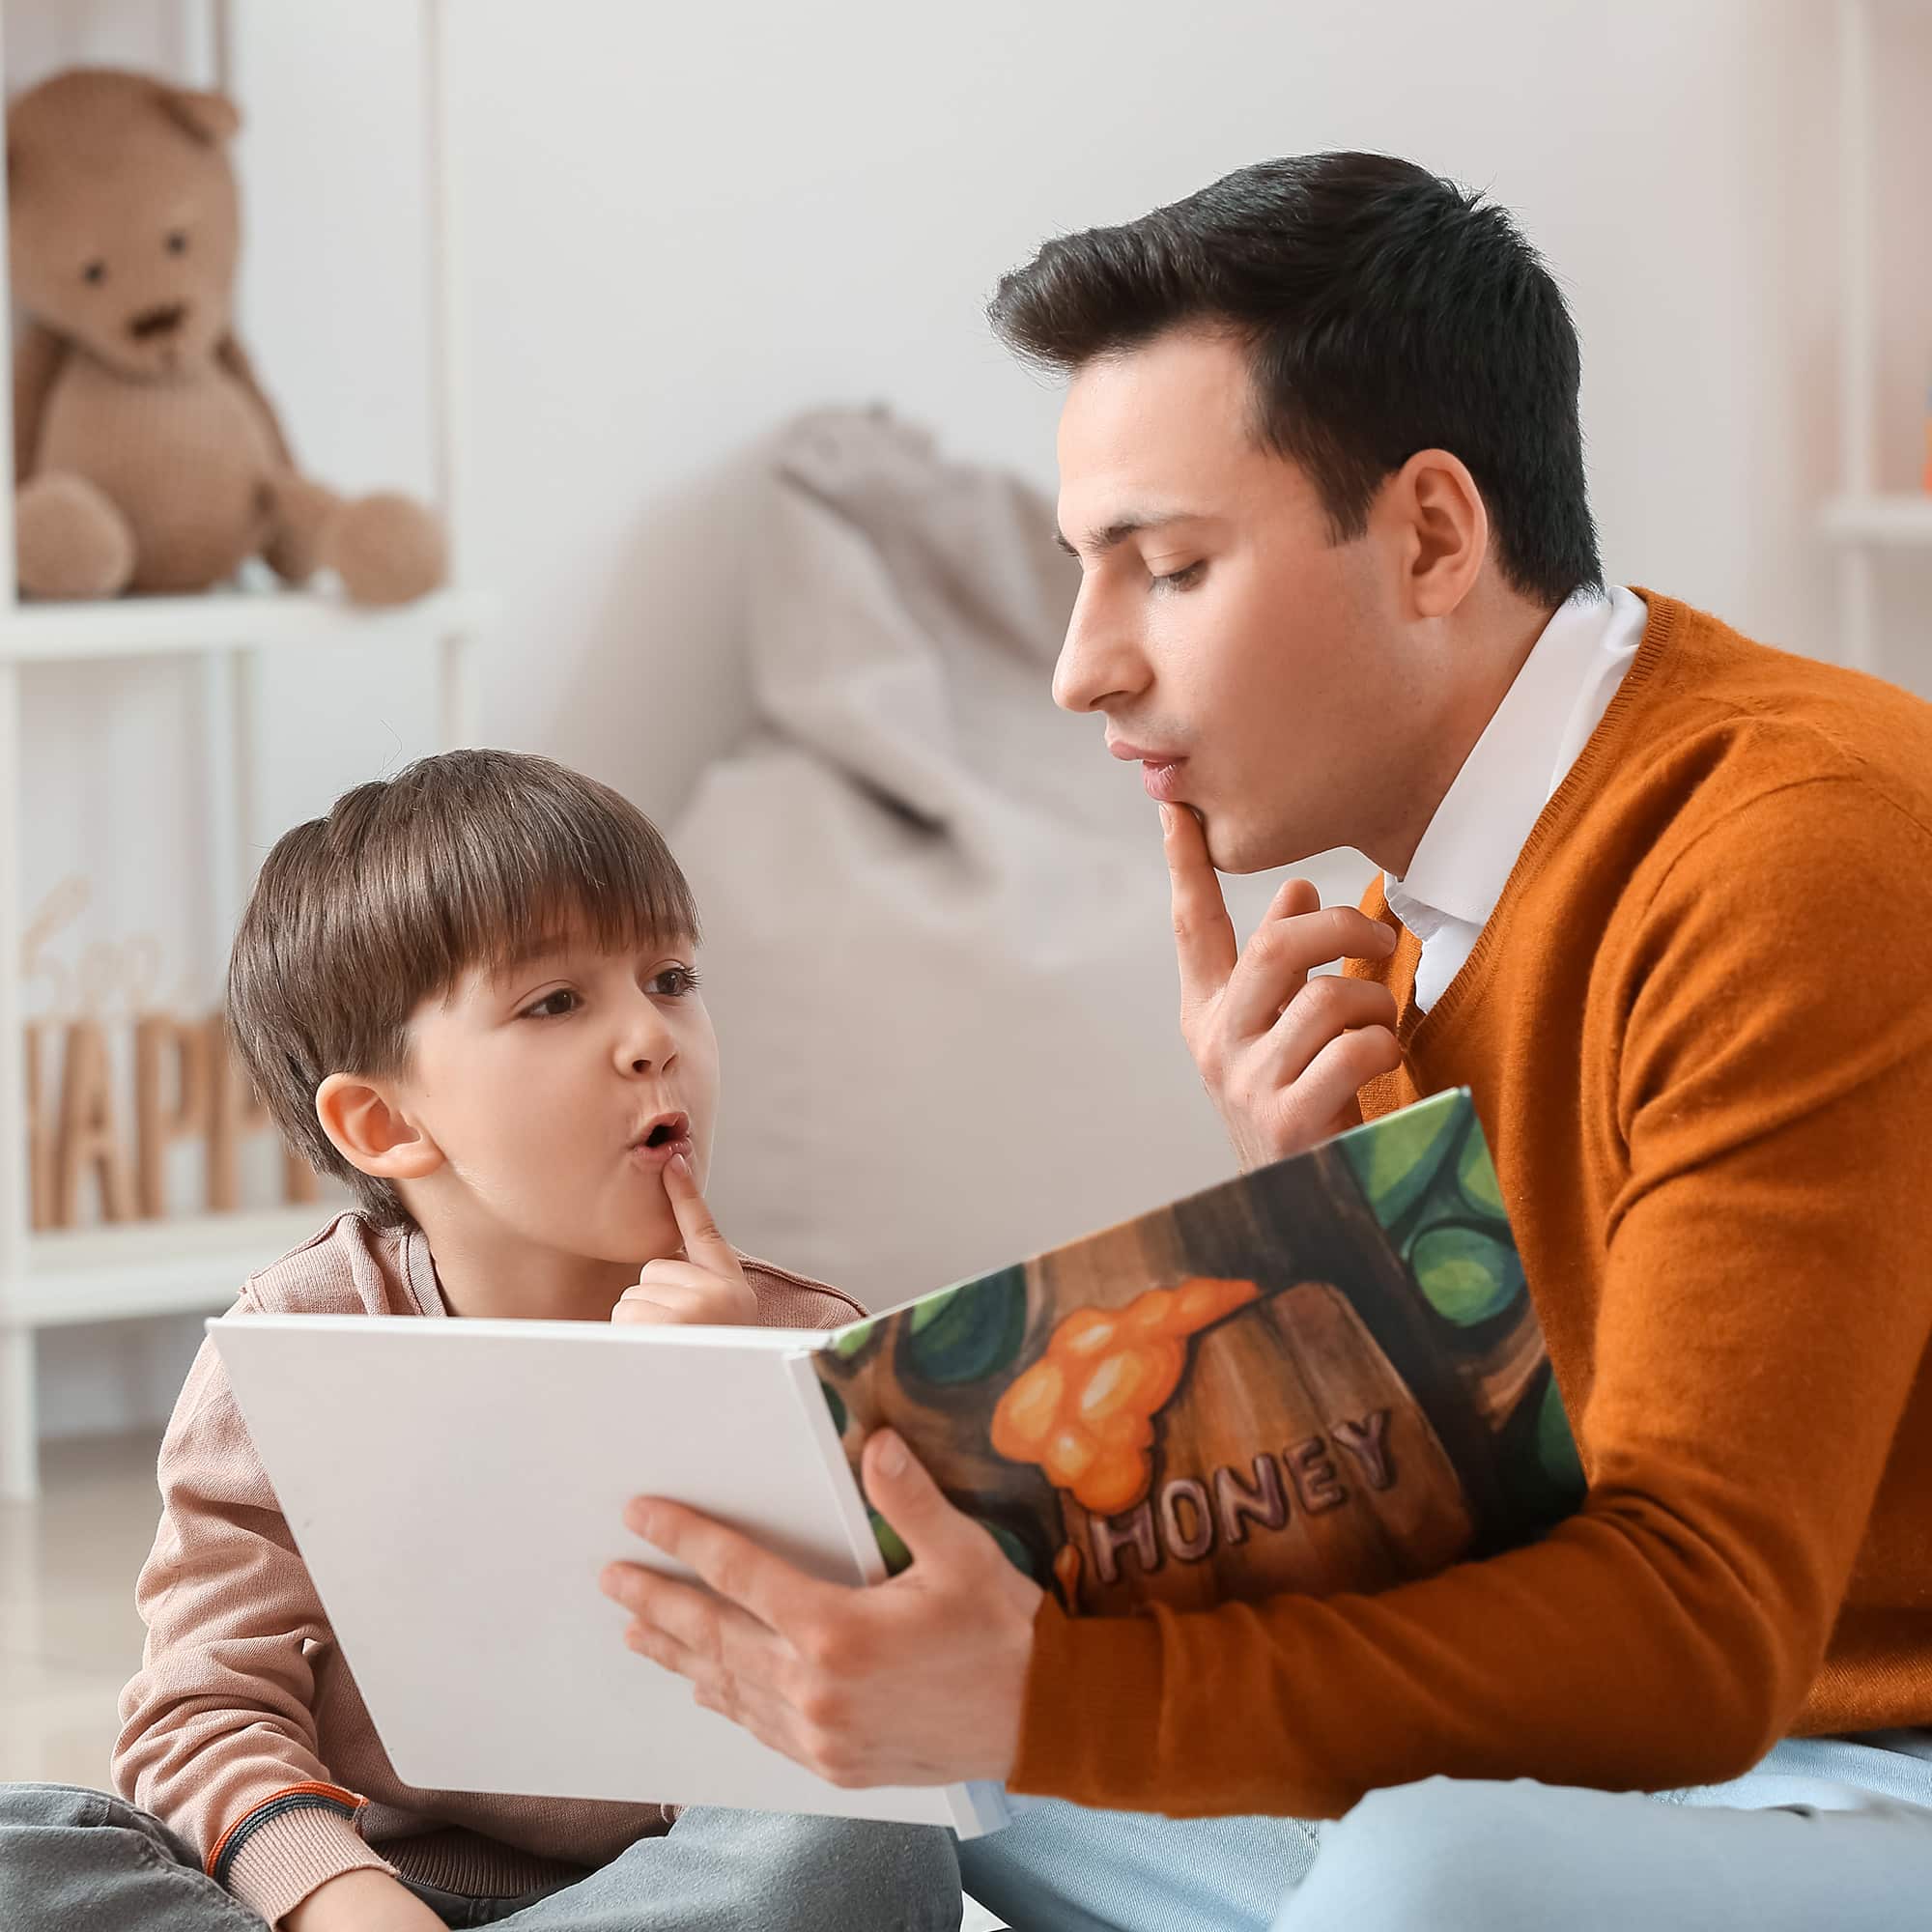 Therapy Connection Online - Online Therapist Community - Speech Therapy - Children Speech Therapy